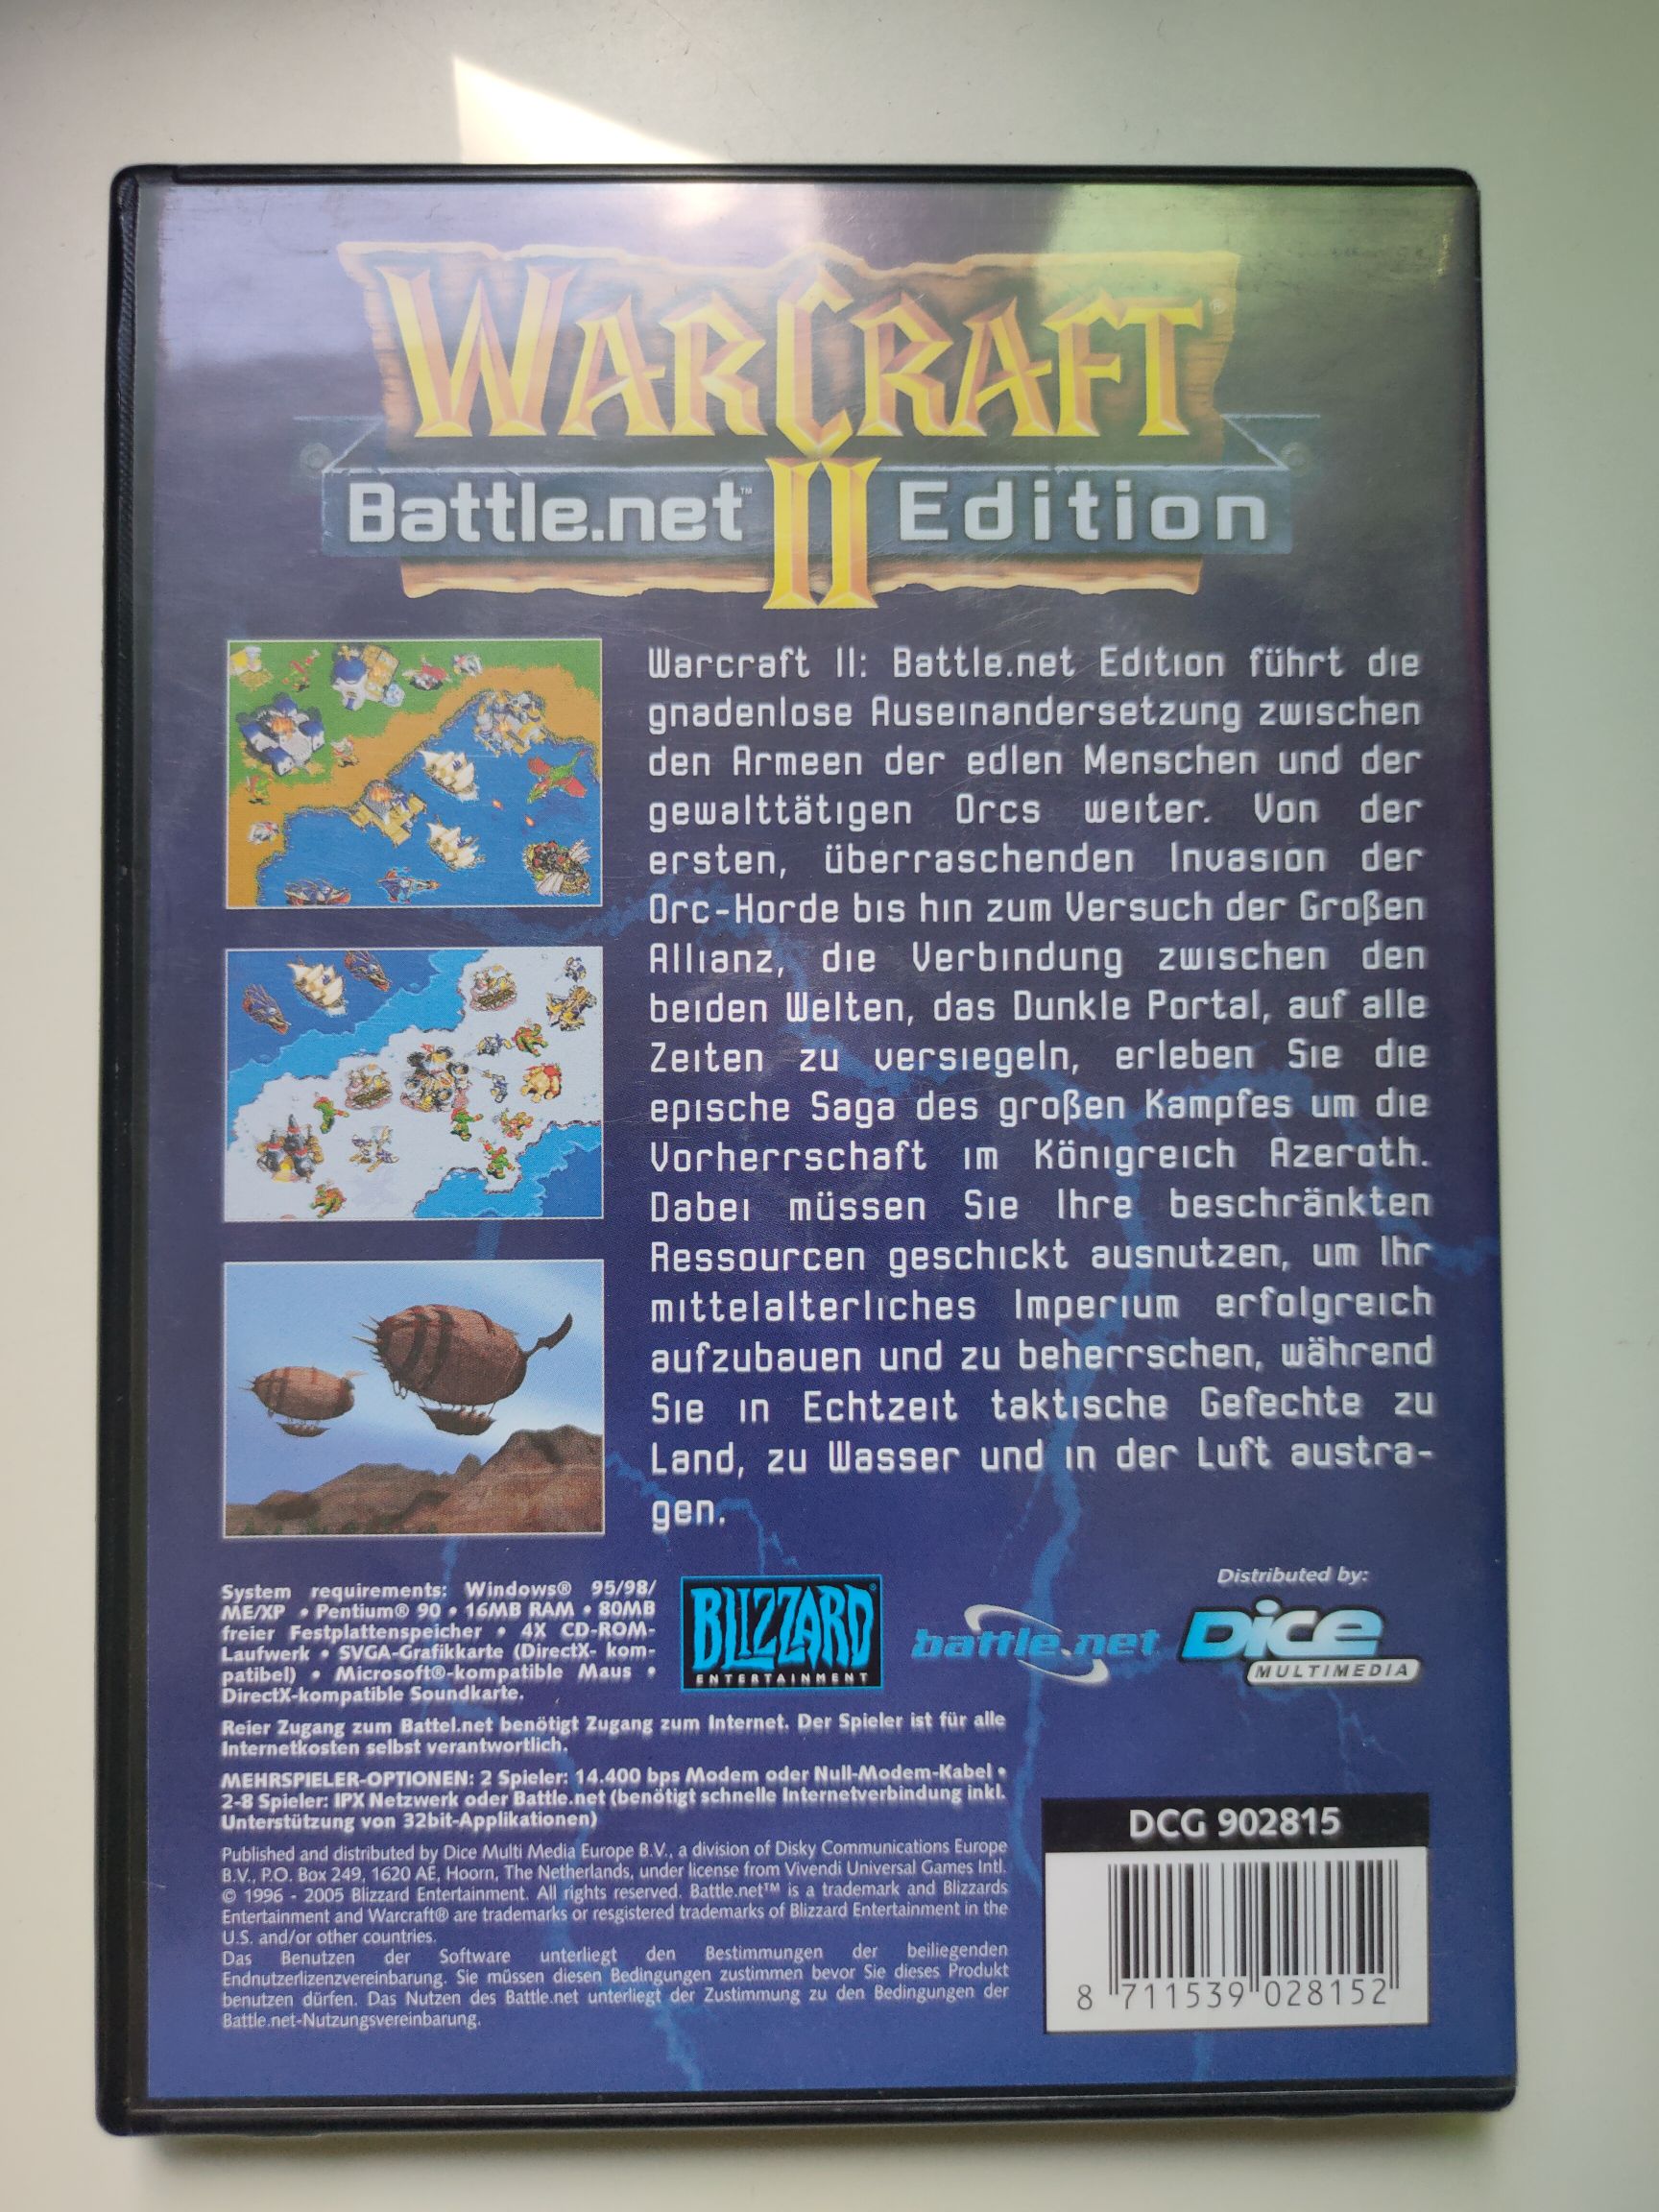 Warcraft II: Battle.net Edition - PC (Blizzard Entertainment) video game collectible [Barcode 8711539028152] - Main Image 2